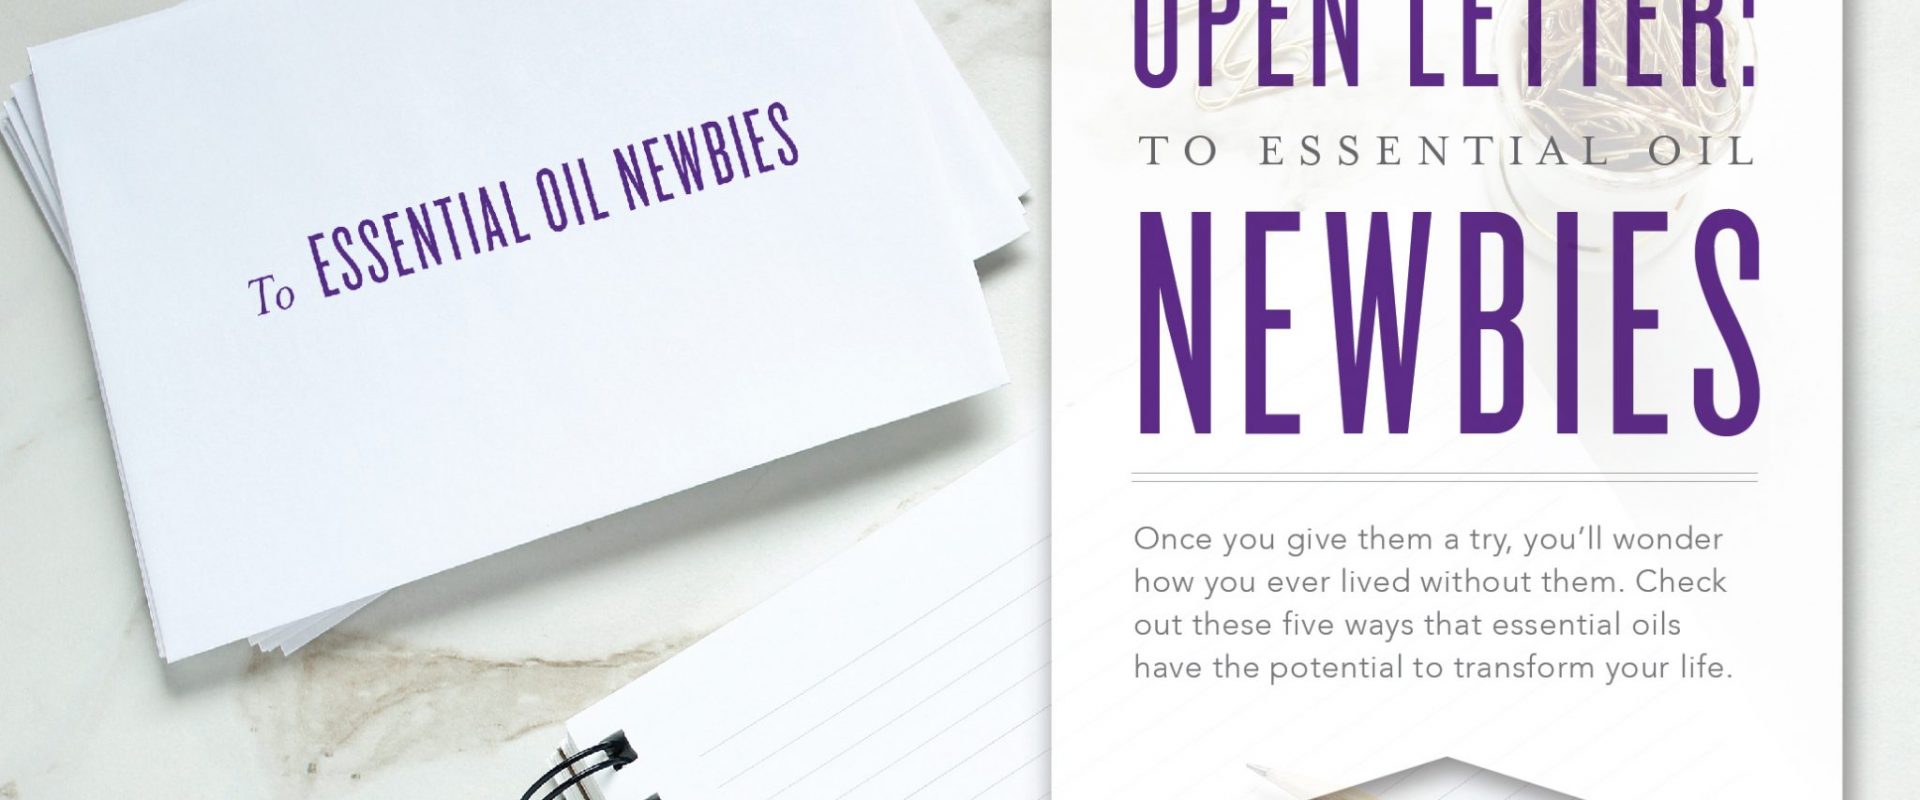 Open letter: To essential oil newbies